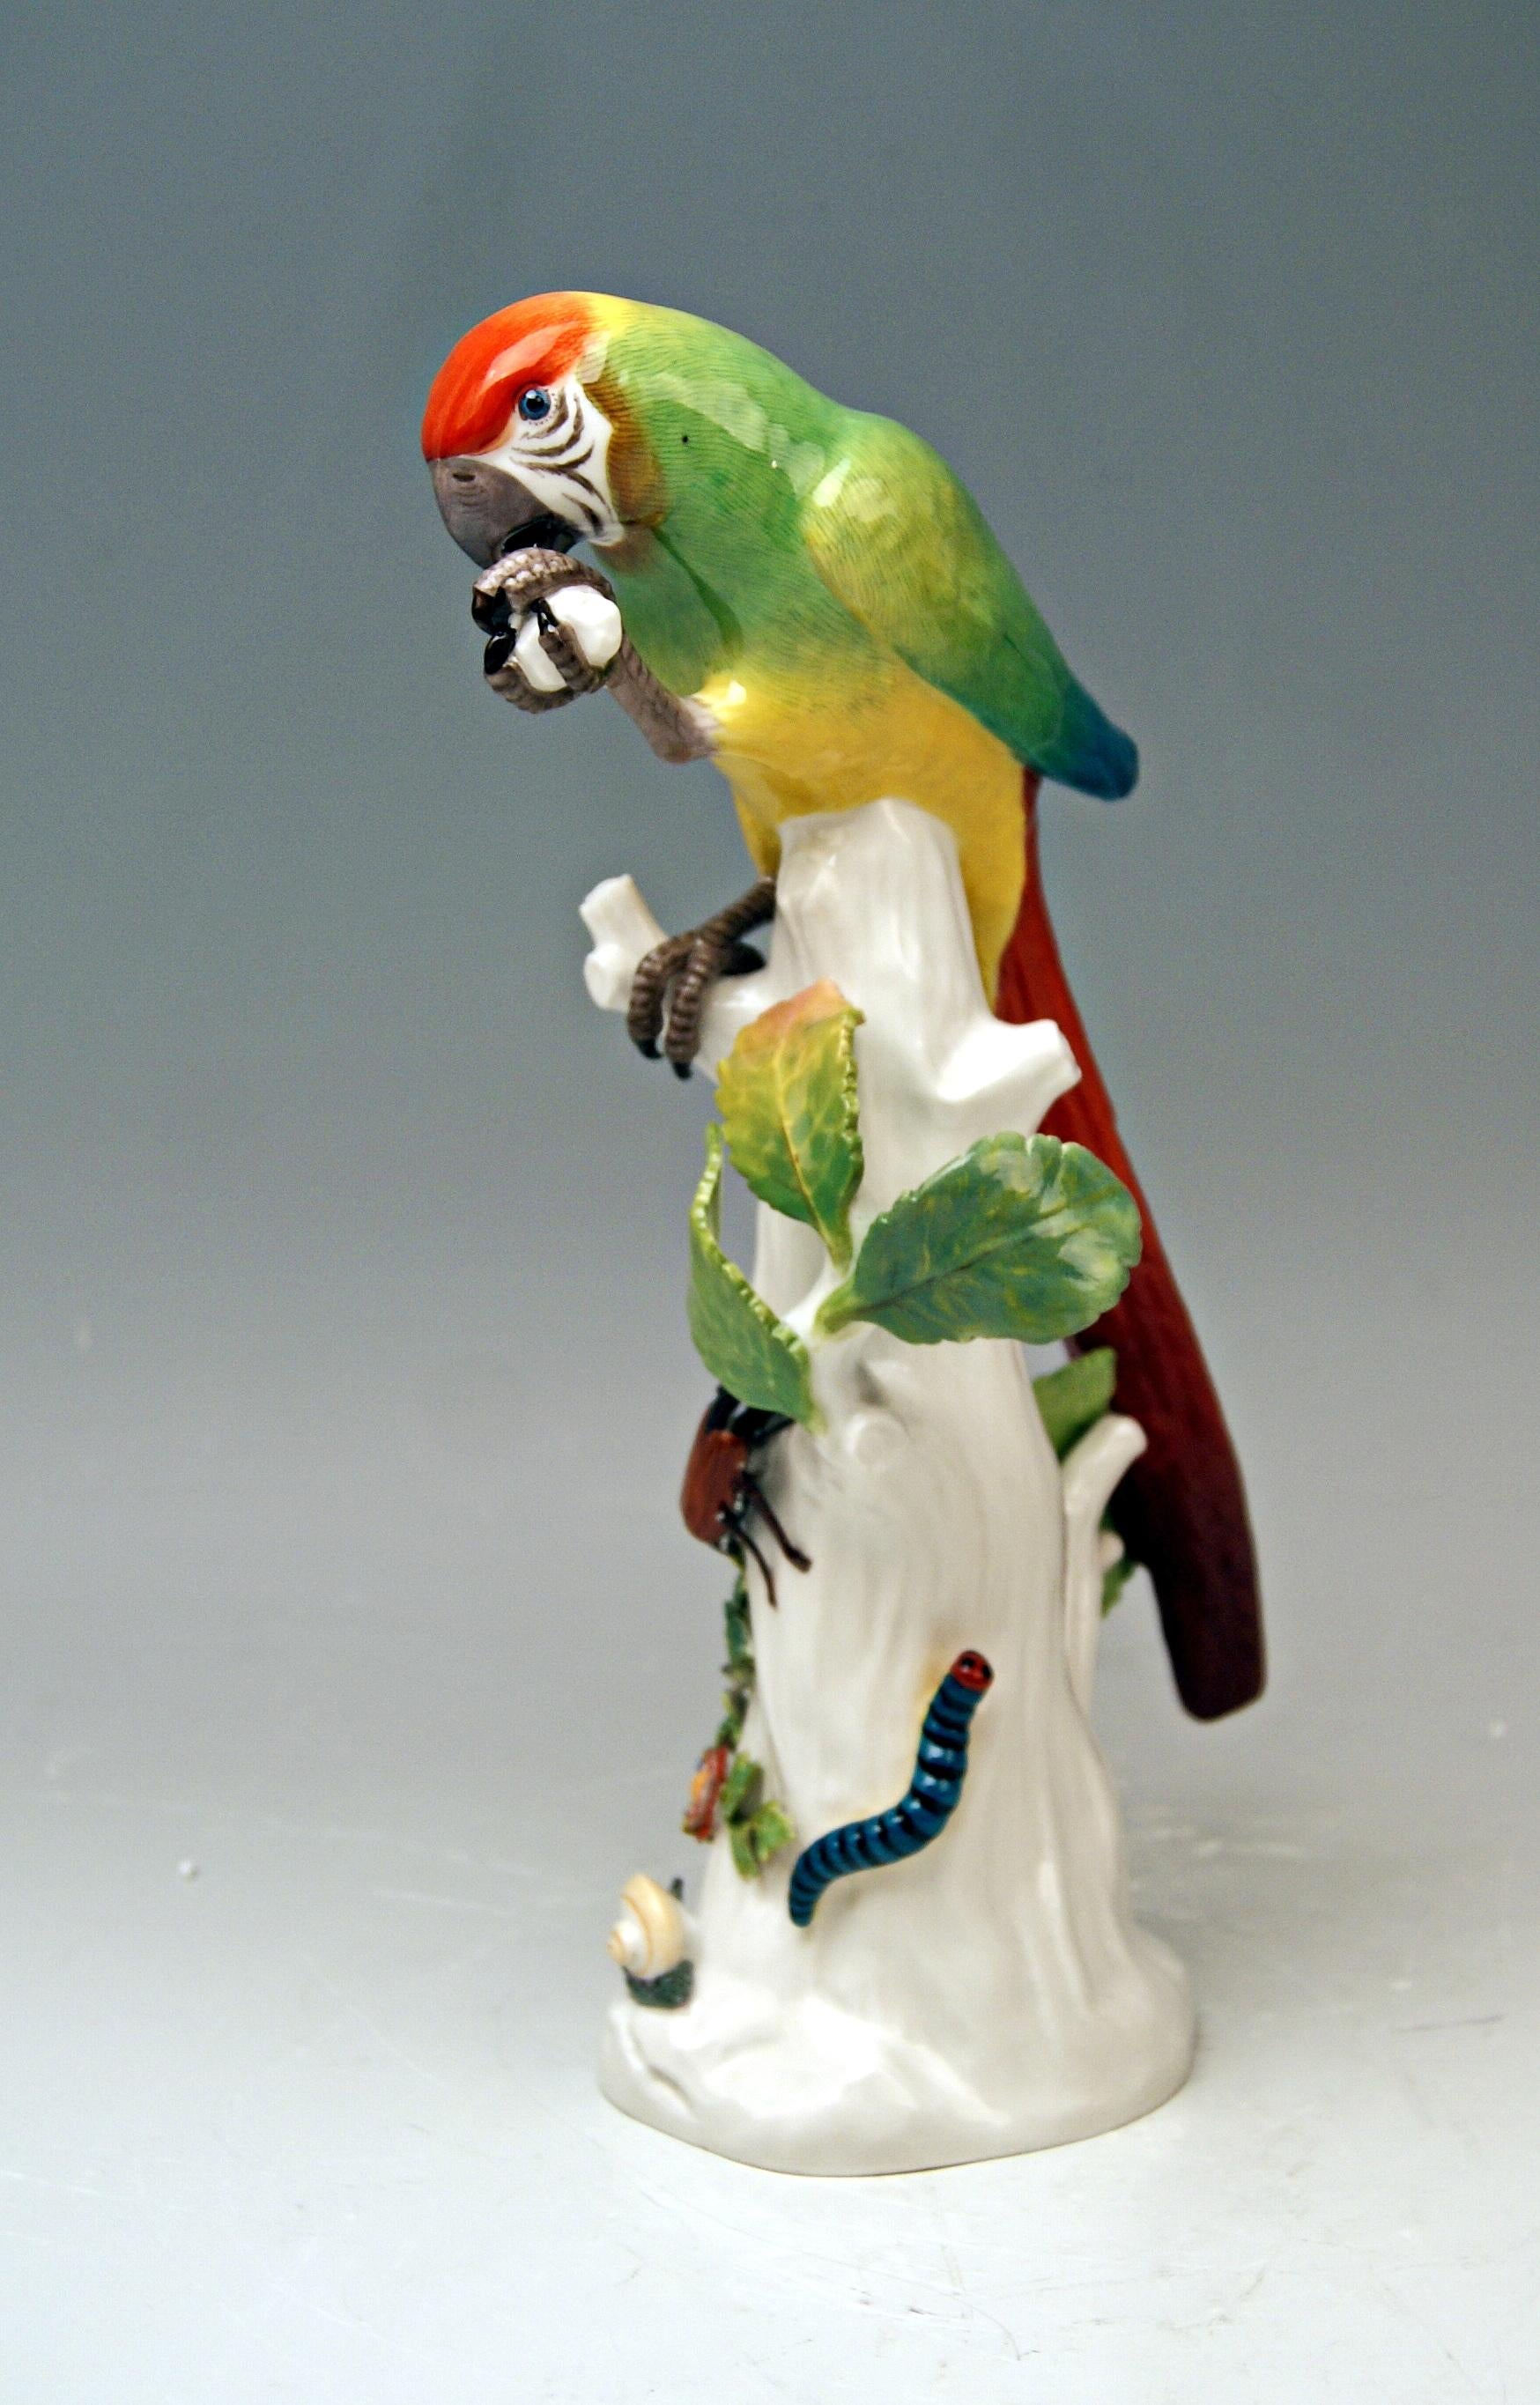 Animal figurine: Parrot situated on a tree's stump with cockchafer

Manufactory: Meissen
Hallmarked: 
Blue Meissen Sword Mark With Pommels on Hilts (underglazed)
model number 20x / painter's number 21 / former's number 13
First